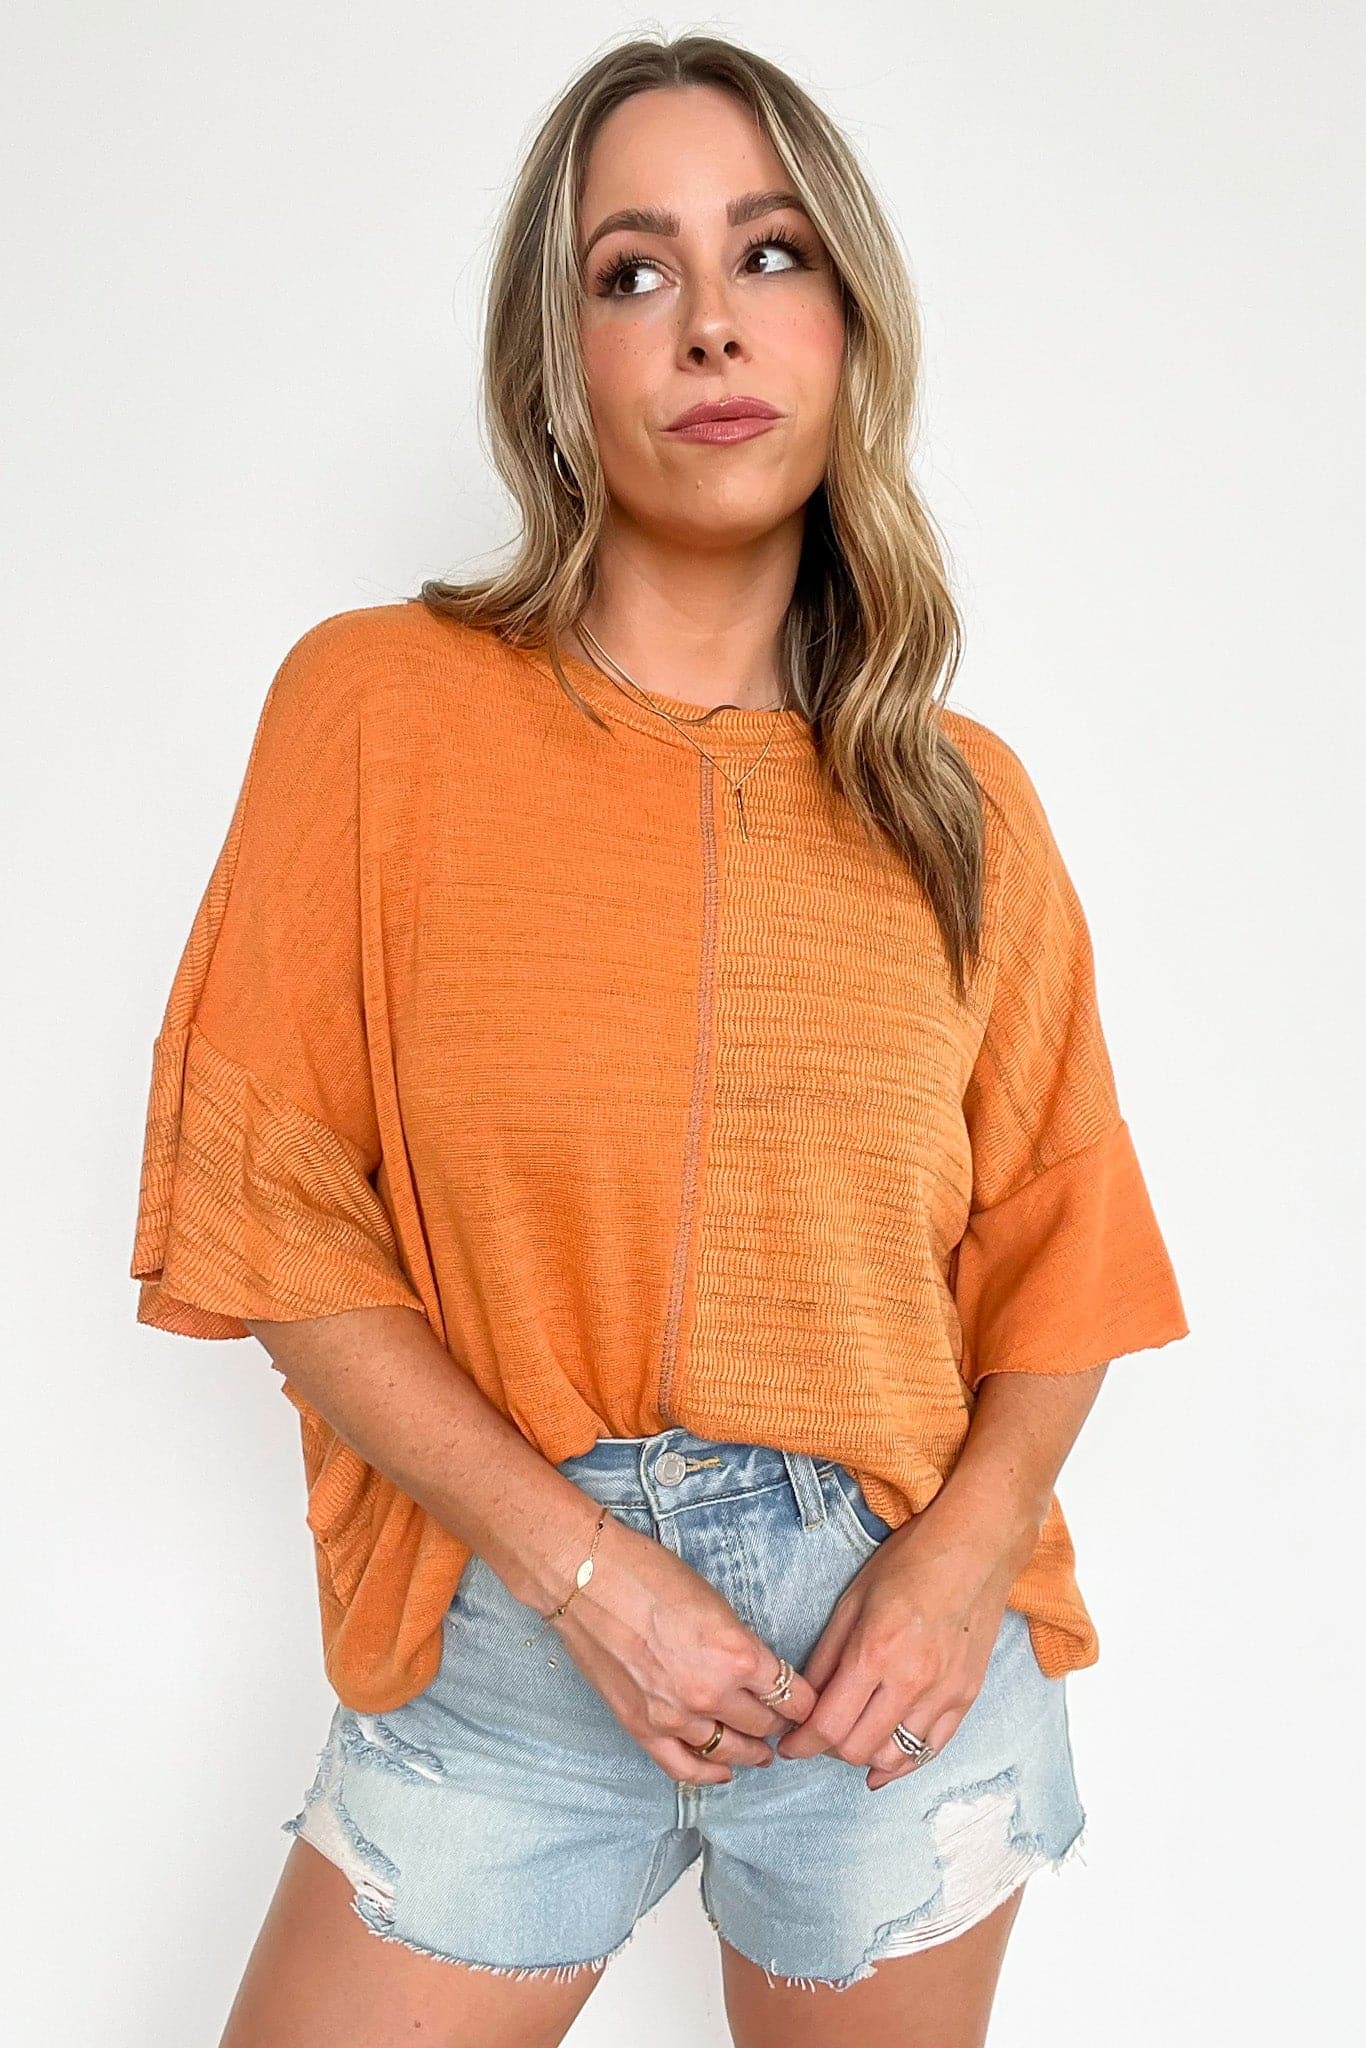 Pumpkin / S Charlyne Contrast Fabric Relaxed Fit Top - FINAL SALE - Madison and Mallory